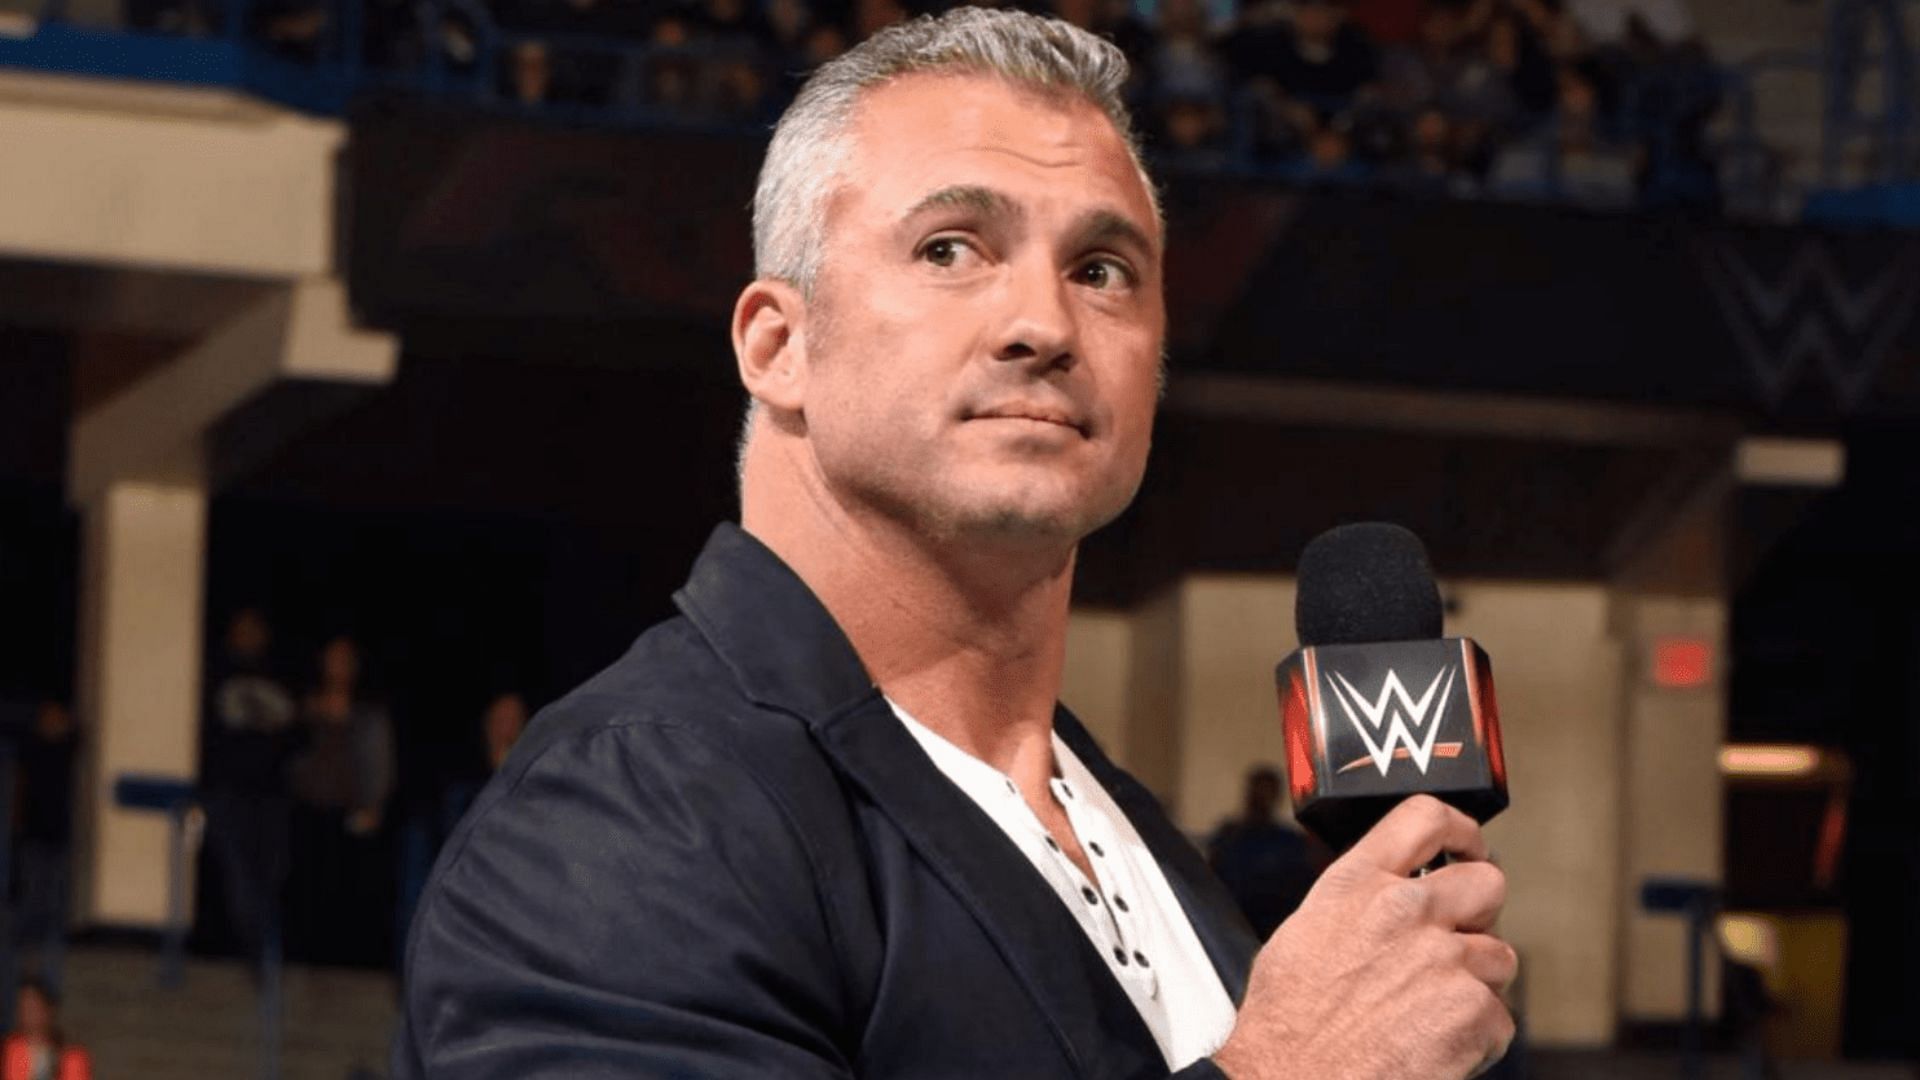 Shane McMahon is one of WWE